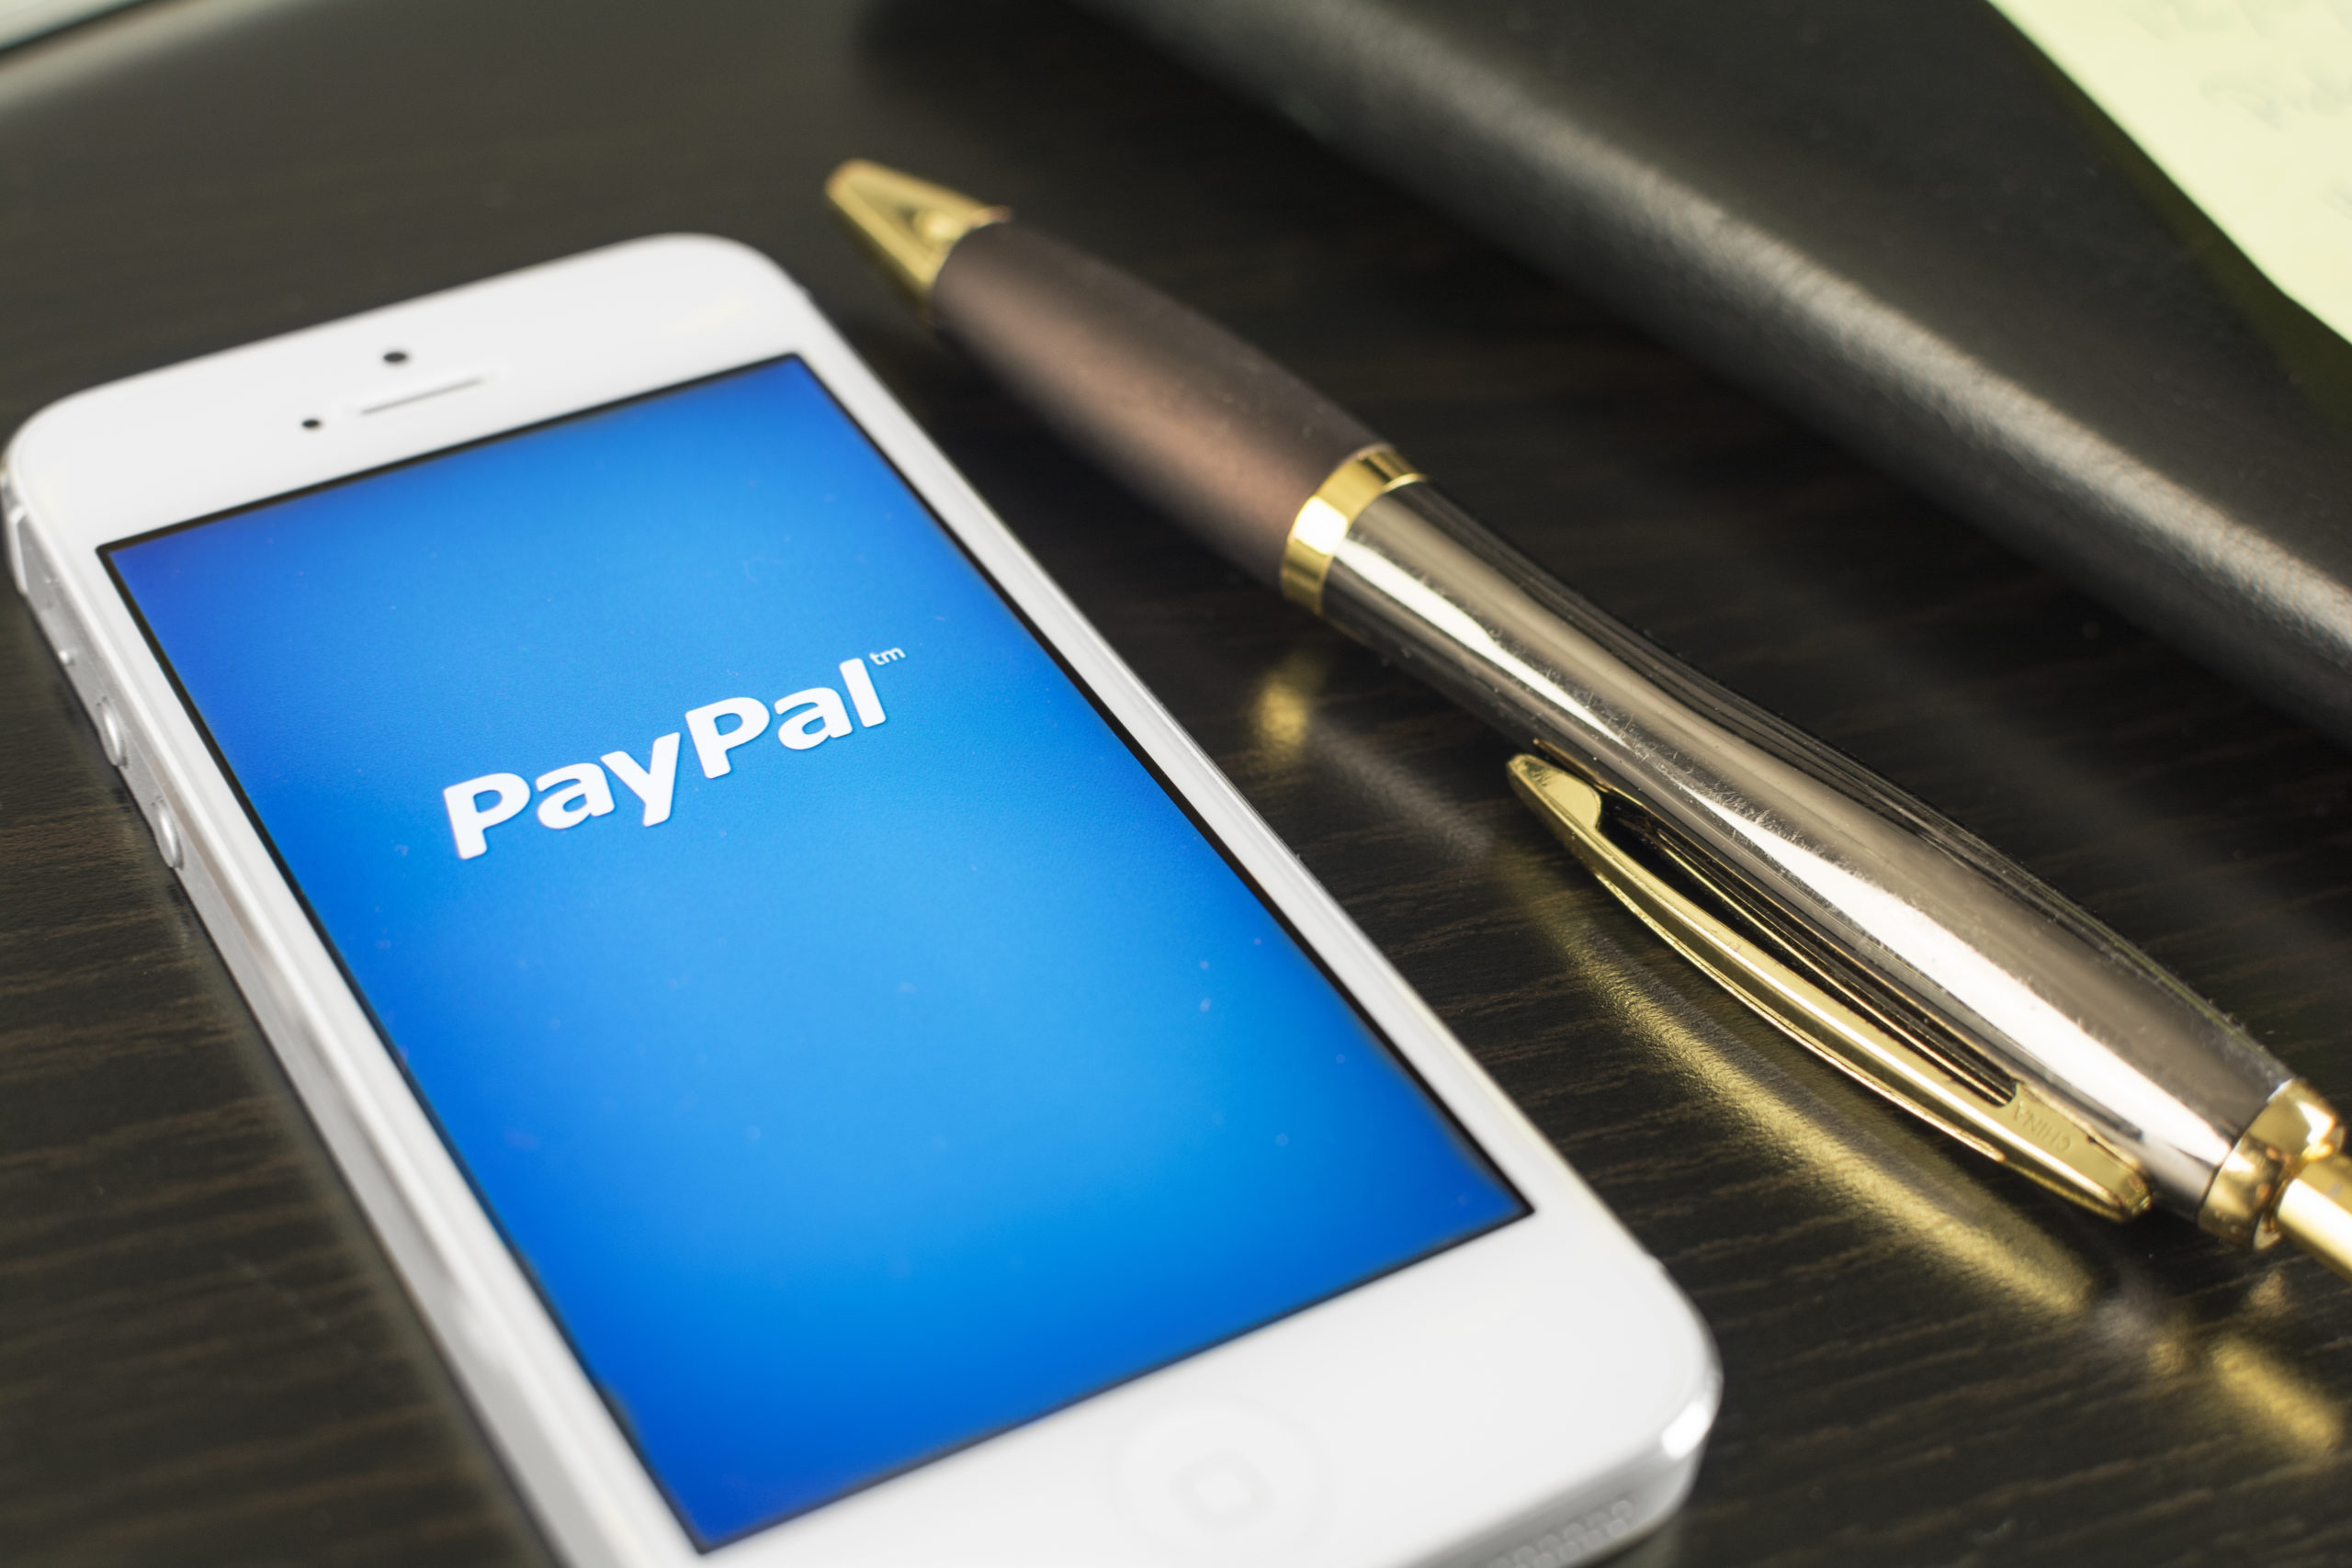 HILVERSUM, NETHERLANDS - JANUARY 07, 2014: PayPal is an international e-commerce business allowing payments and money transfers online. Paypal is a publicly traded company since February 2002